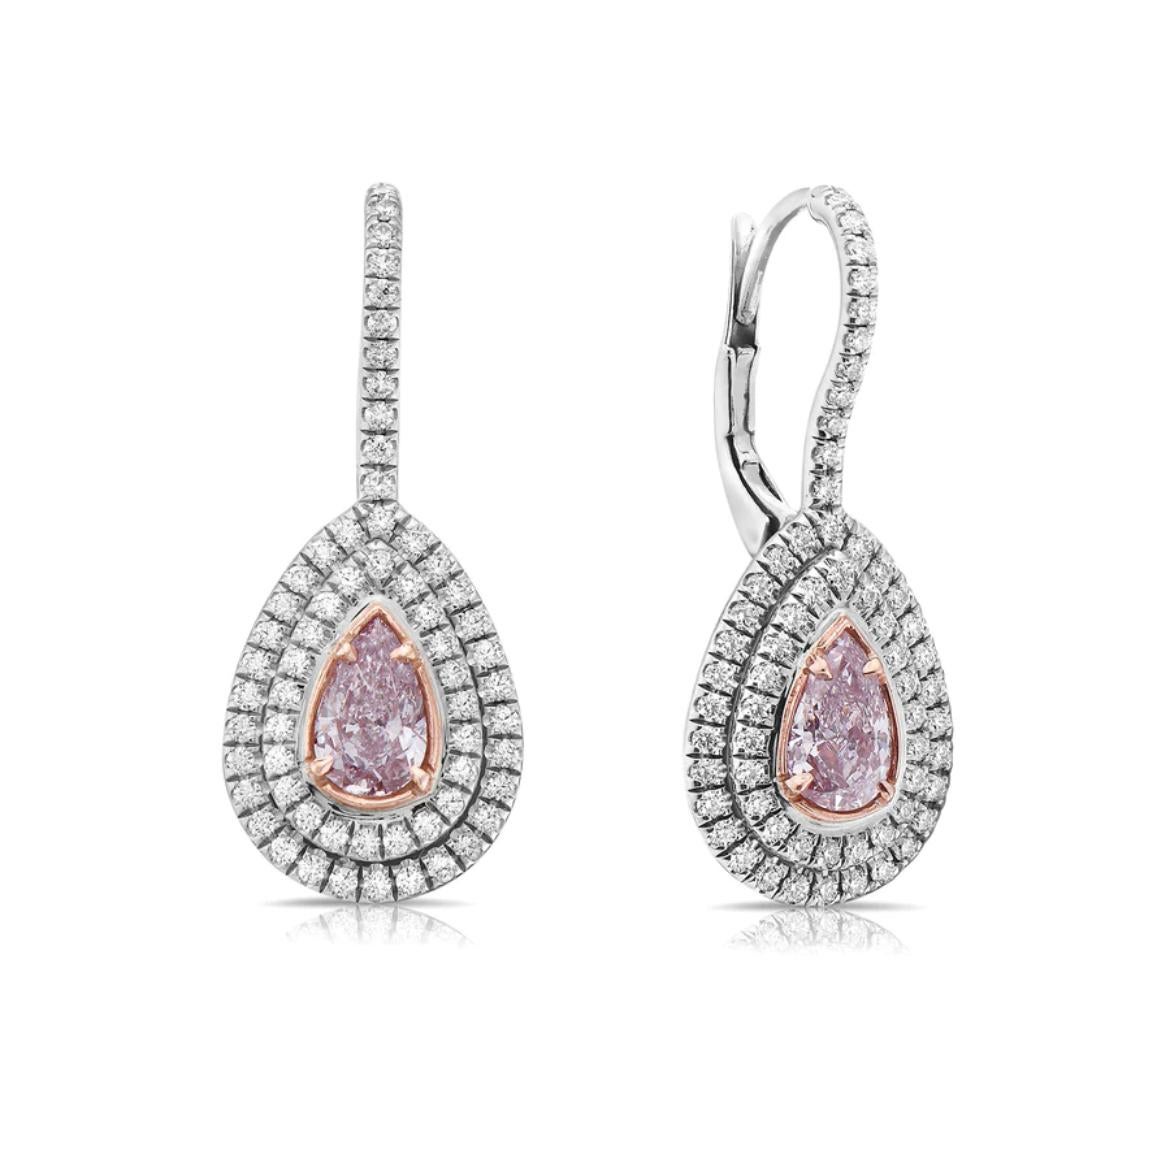 - 0.52ct & 0.52ct Faint / Light Pink SI1 Pear Shapes GIA
- Sweet colors.
- Set in 18kt WG and Rose Gold with 124pc 0.64ct of white diamonds